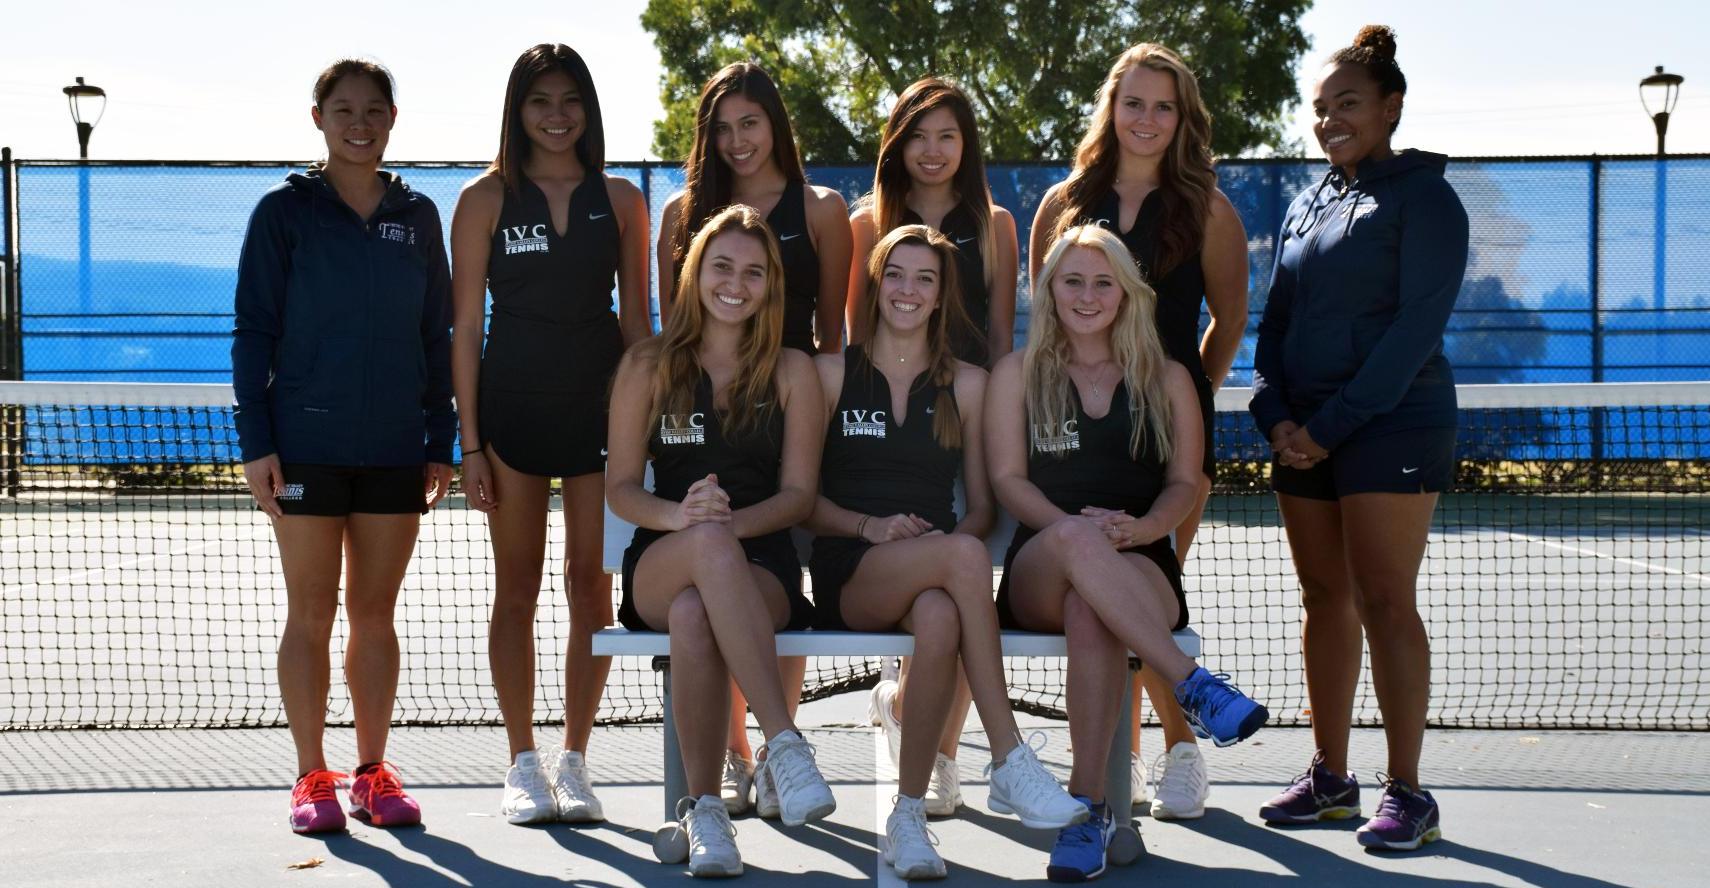 Women's tennis team excited, ready for 2016 season